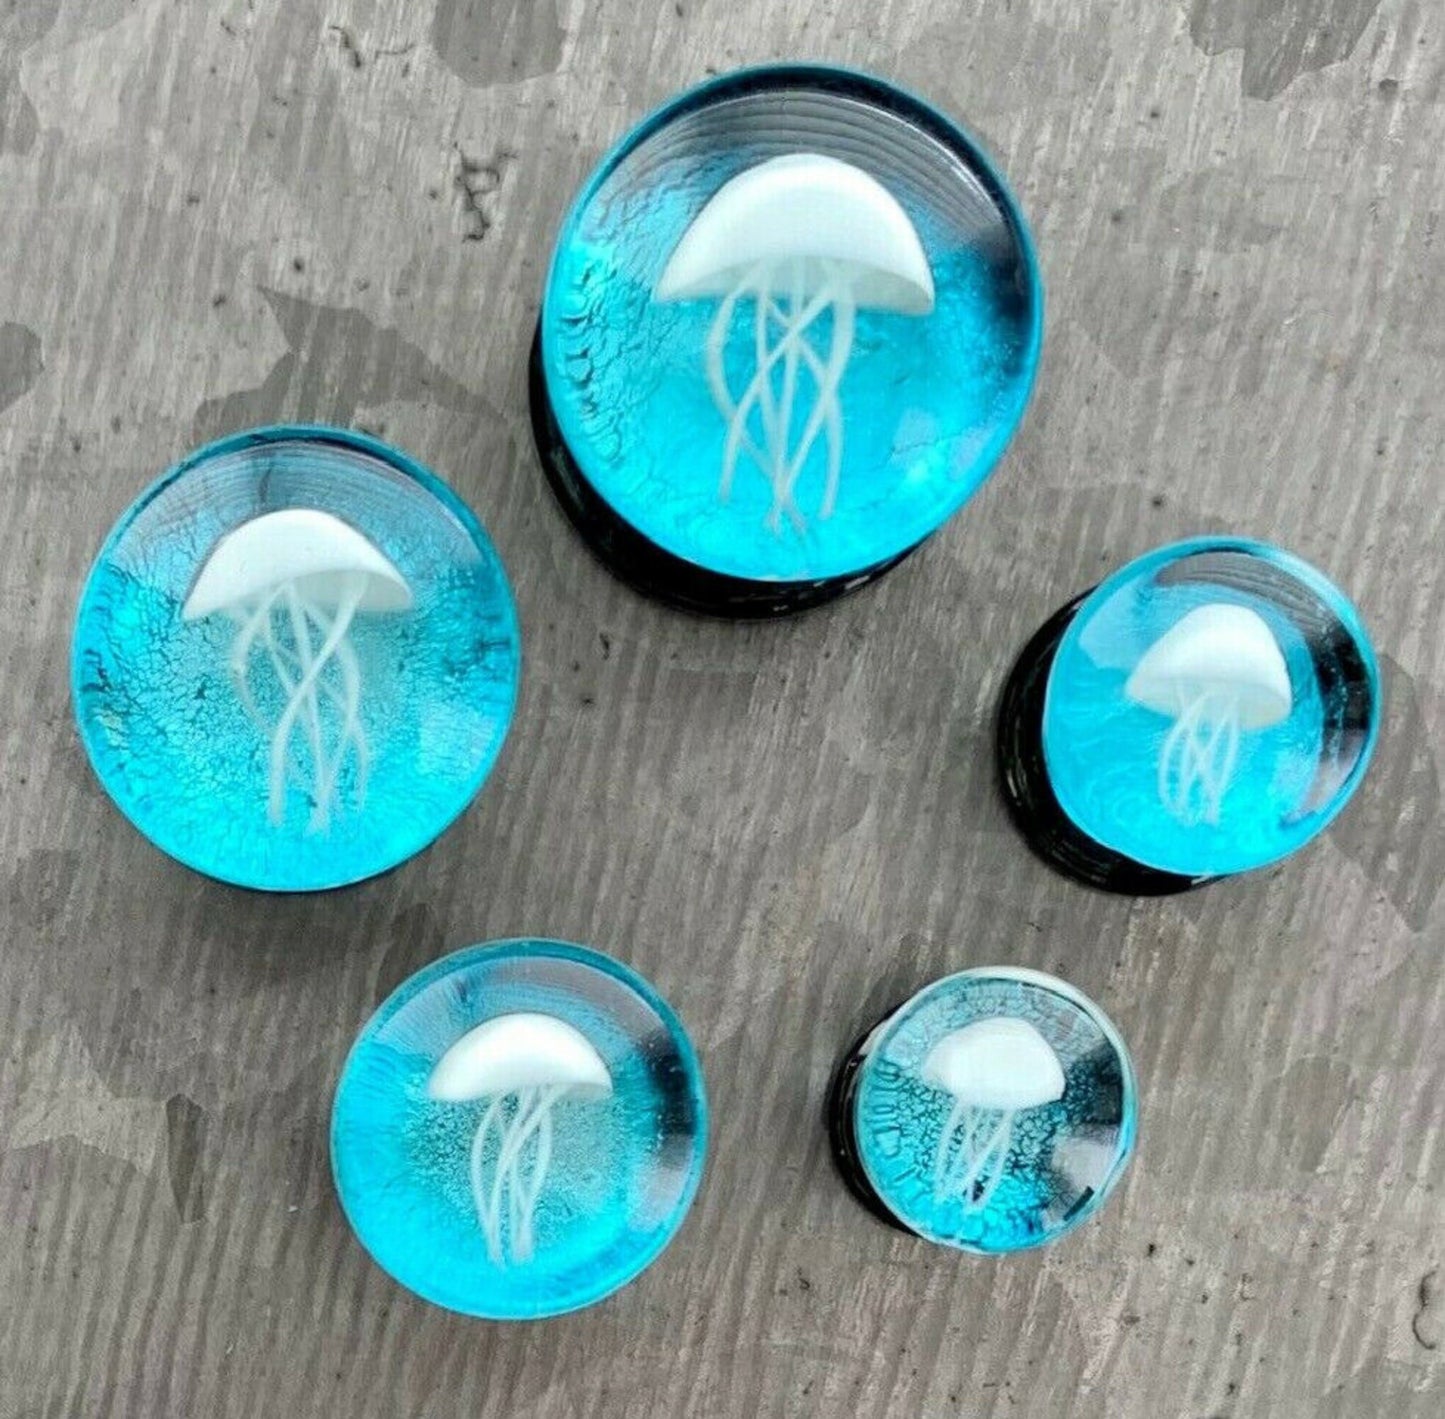 PAIR of Stunning Floating Jellyfish Design Pyrex Glass Double Flare Plugs -Gauges 0g (8mm) through 1" (25mm) available!